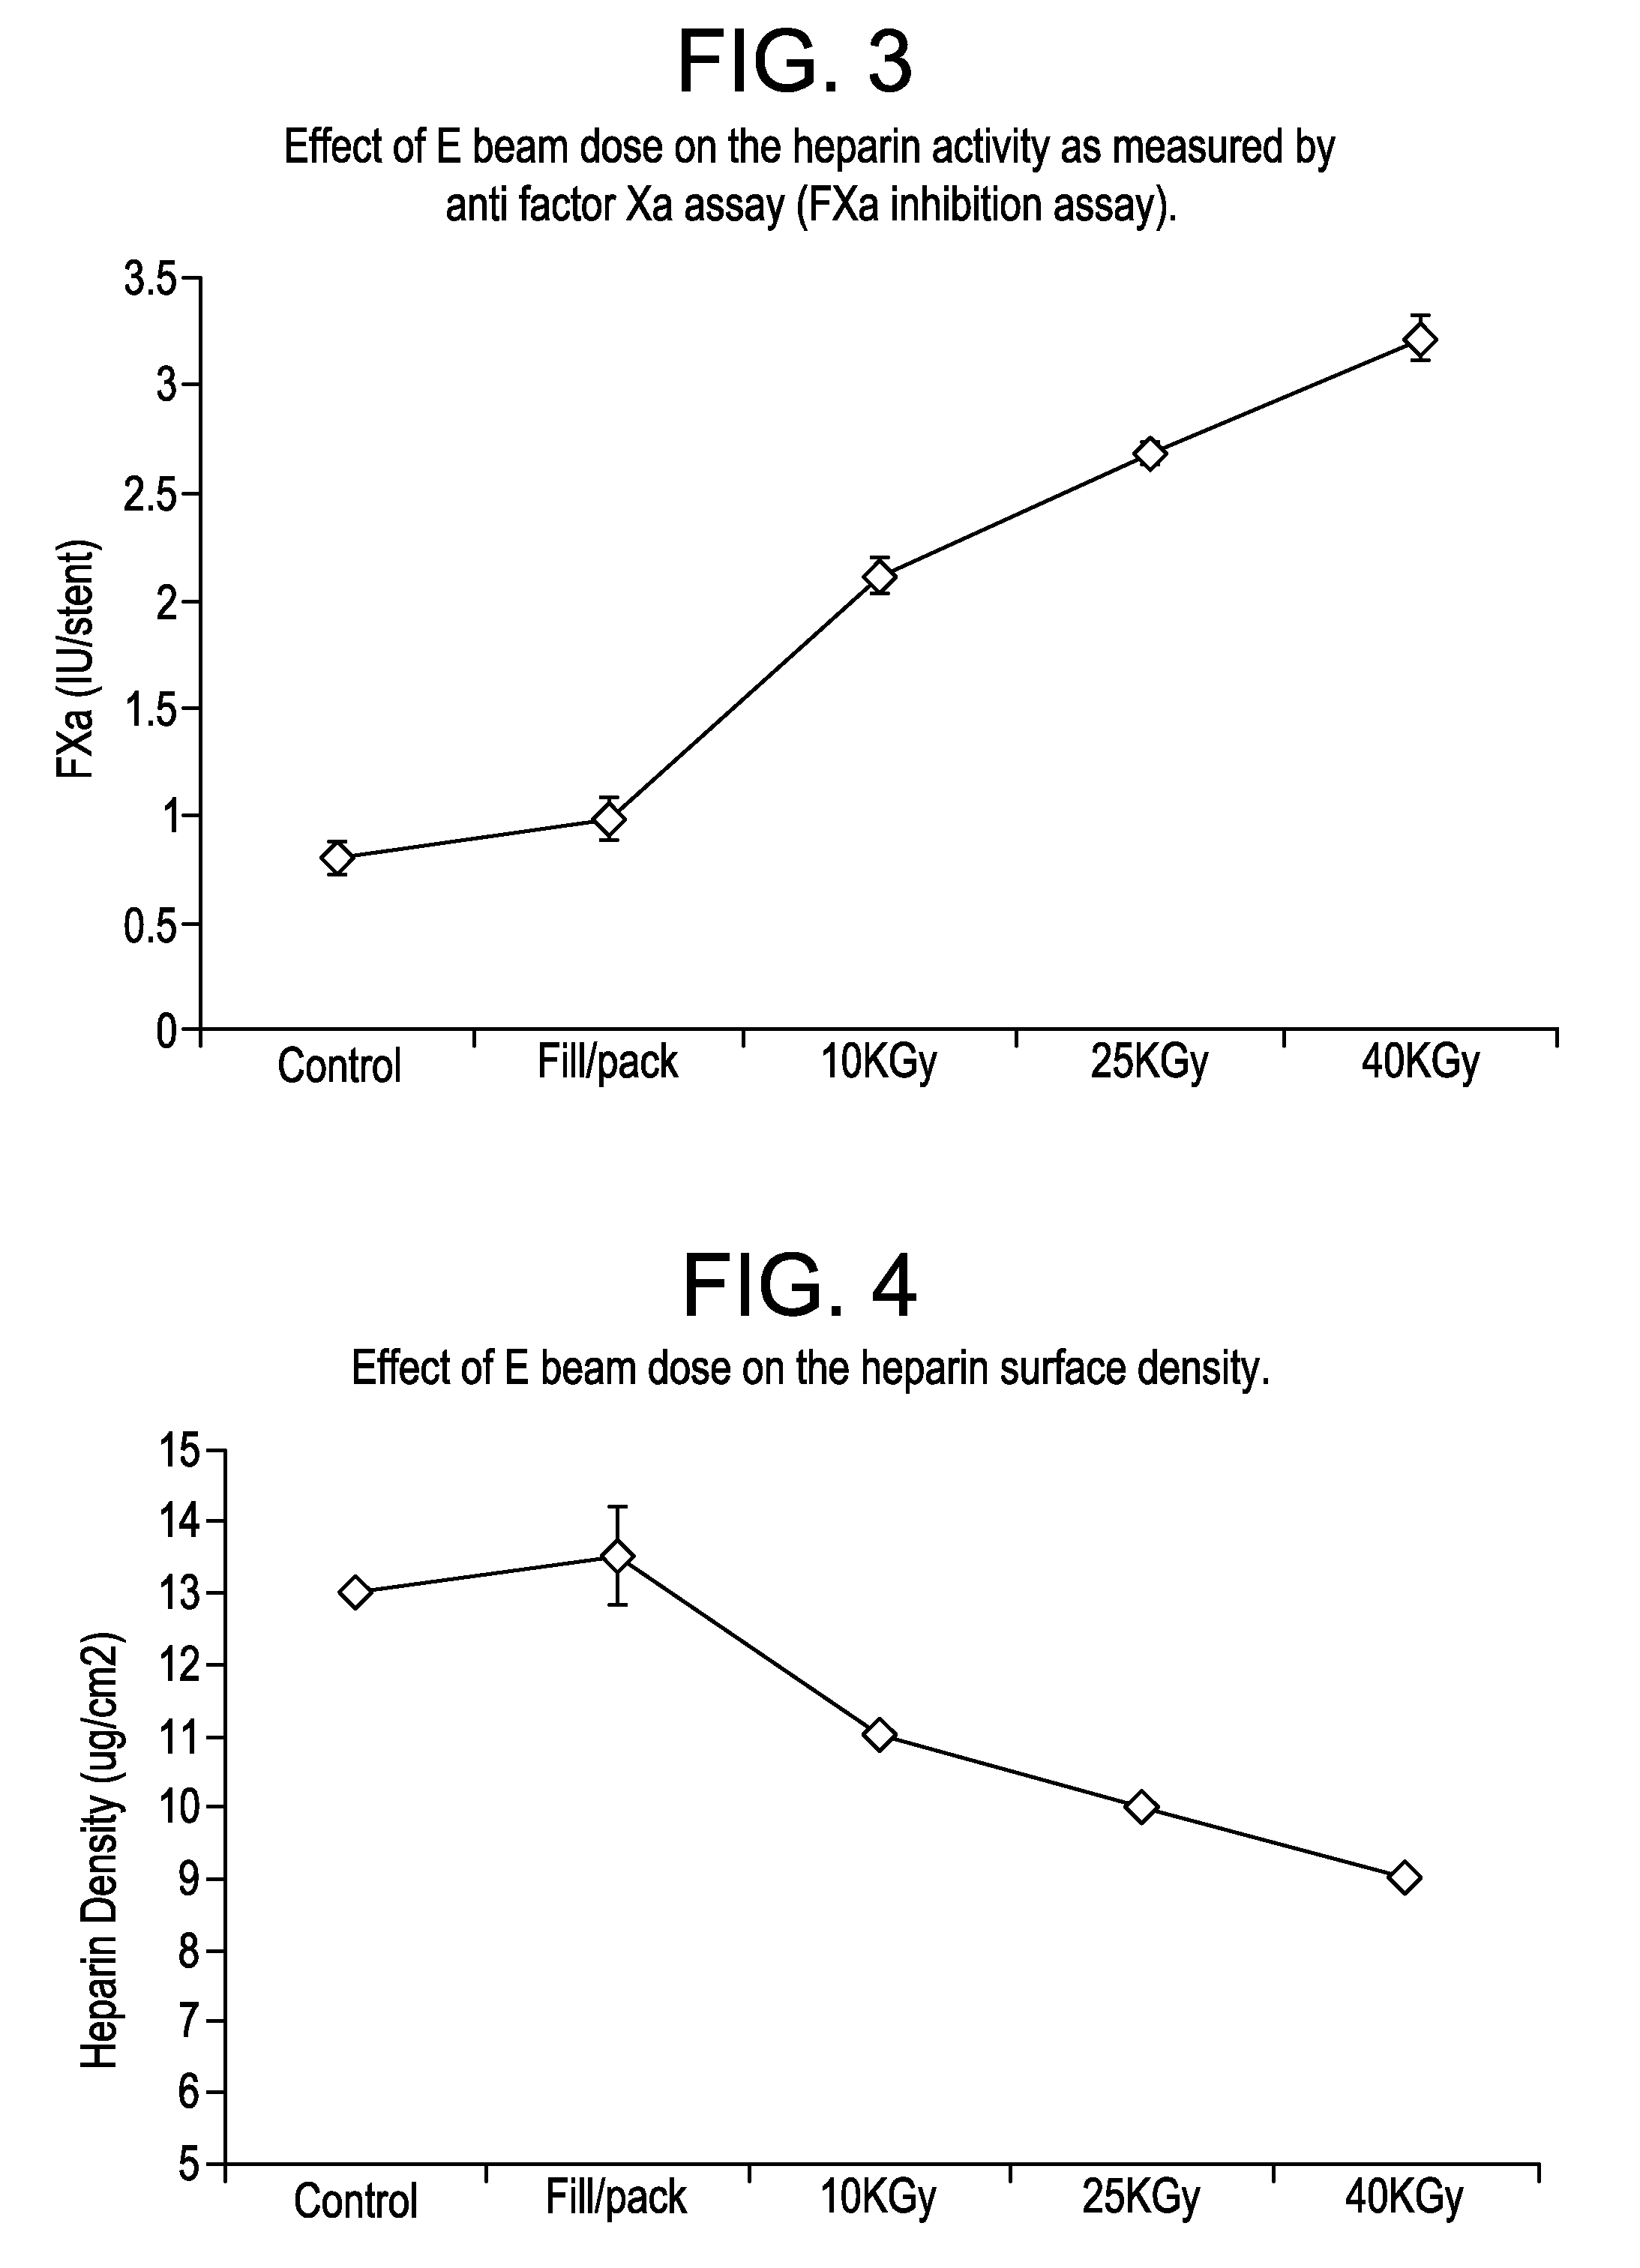 E beam sterilization of medical devices comprising bioactive coating